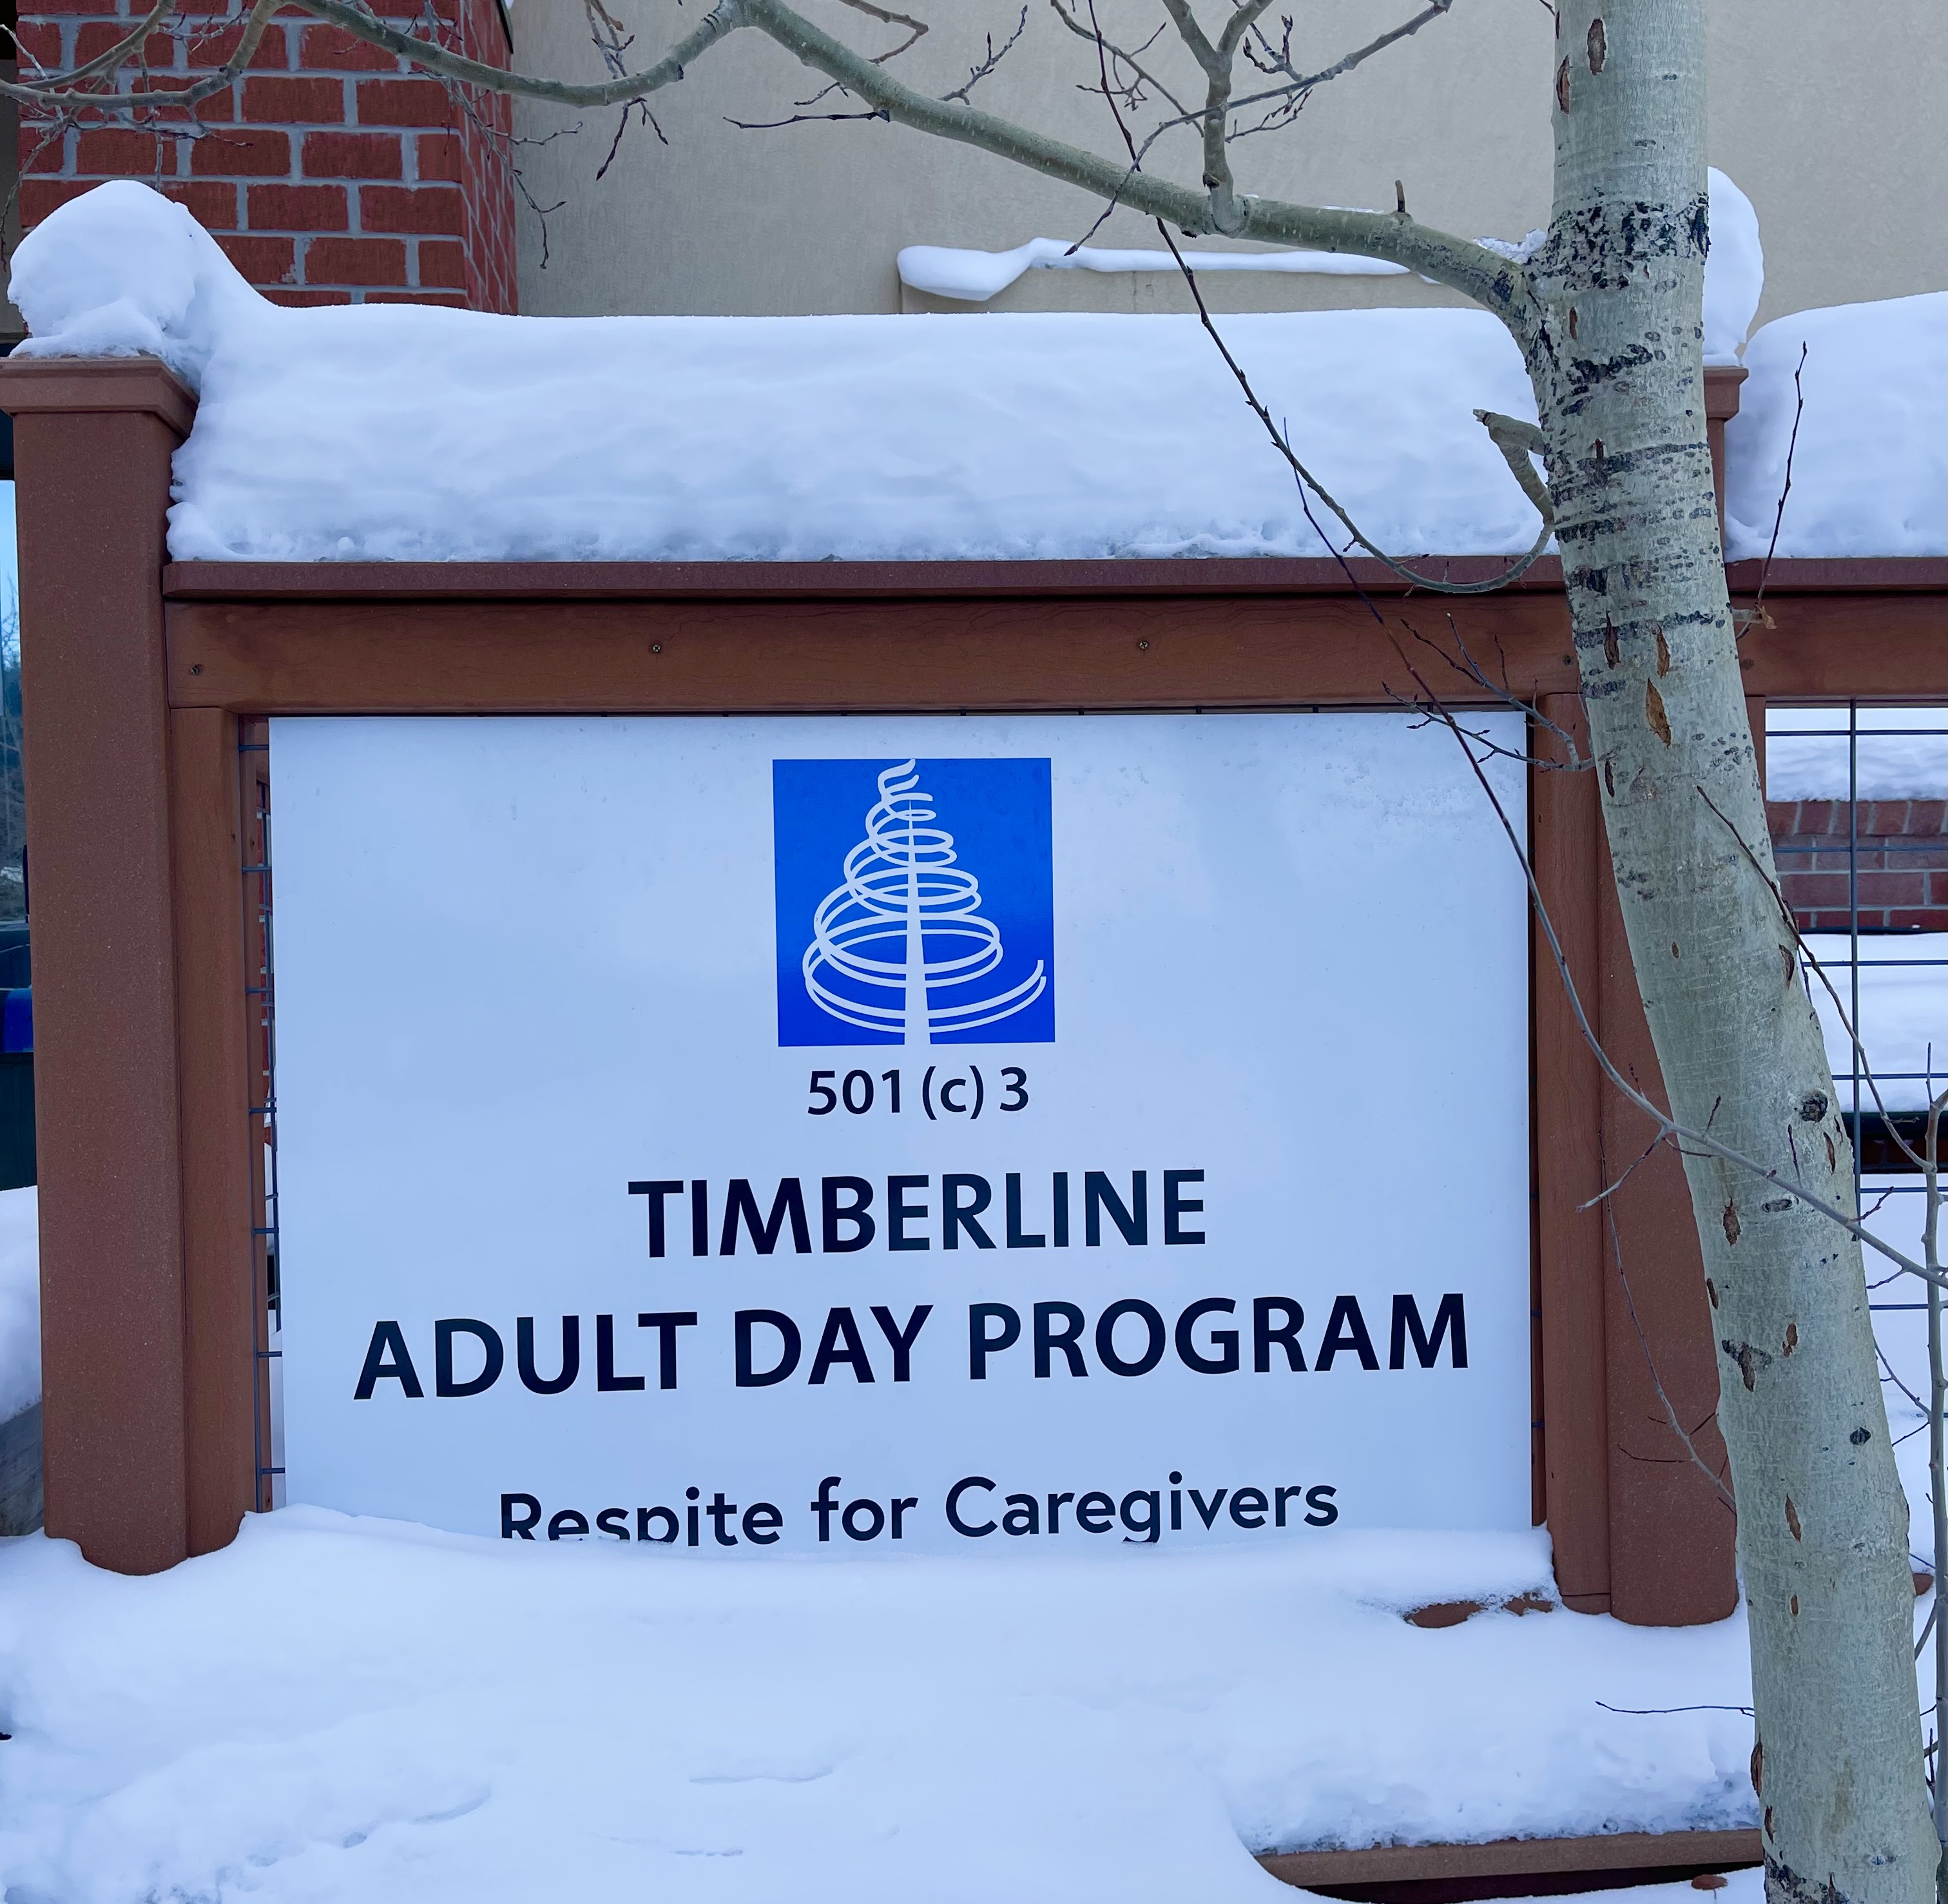 Timberline is located at the Frisco Community Center on Nancy's Place, just off Highway 9.